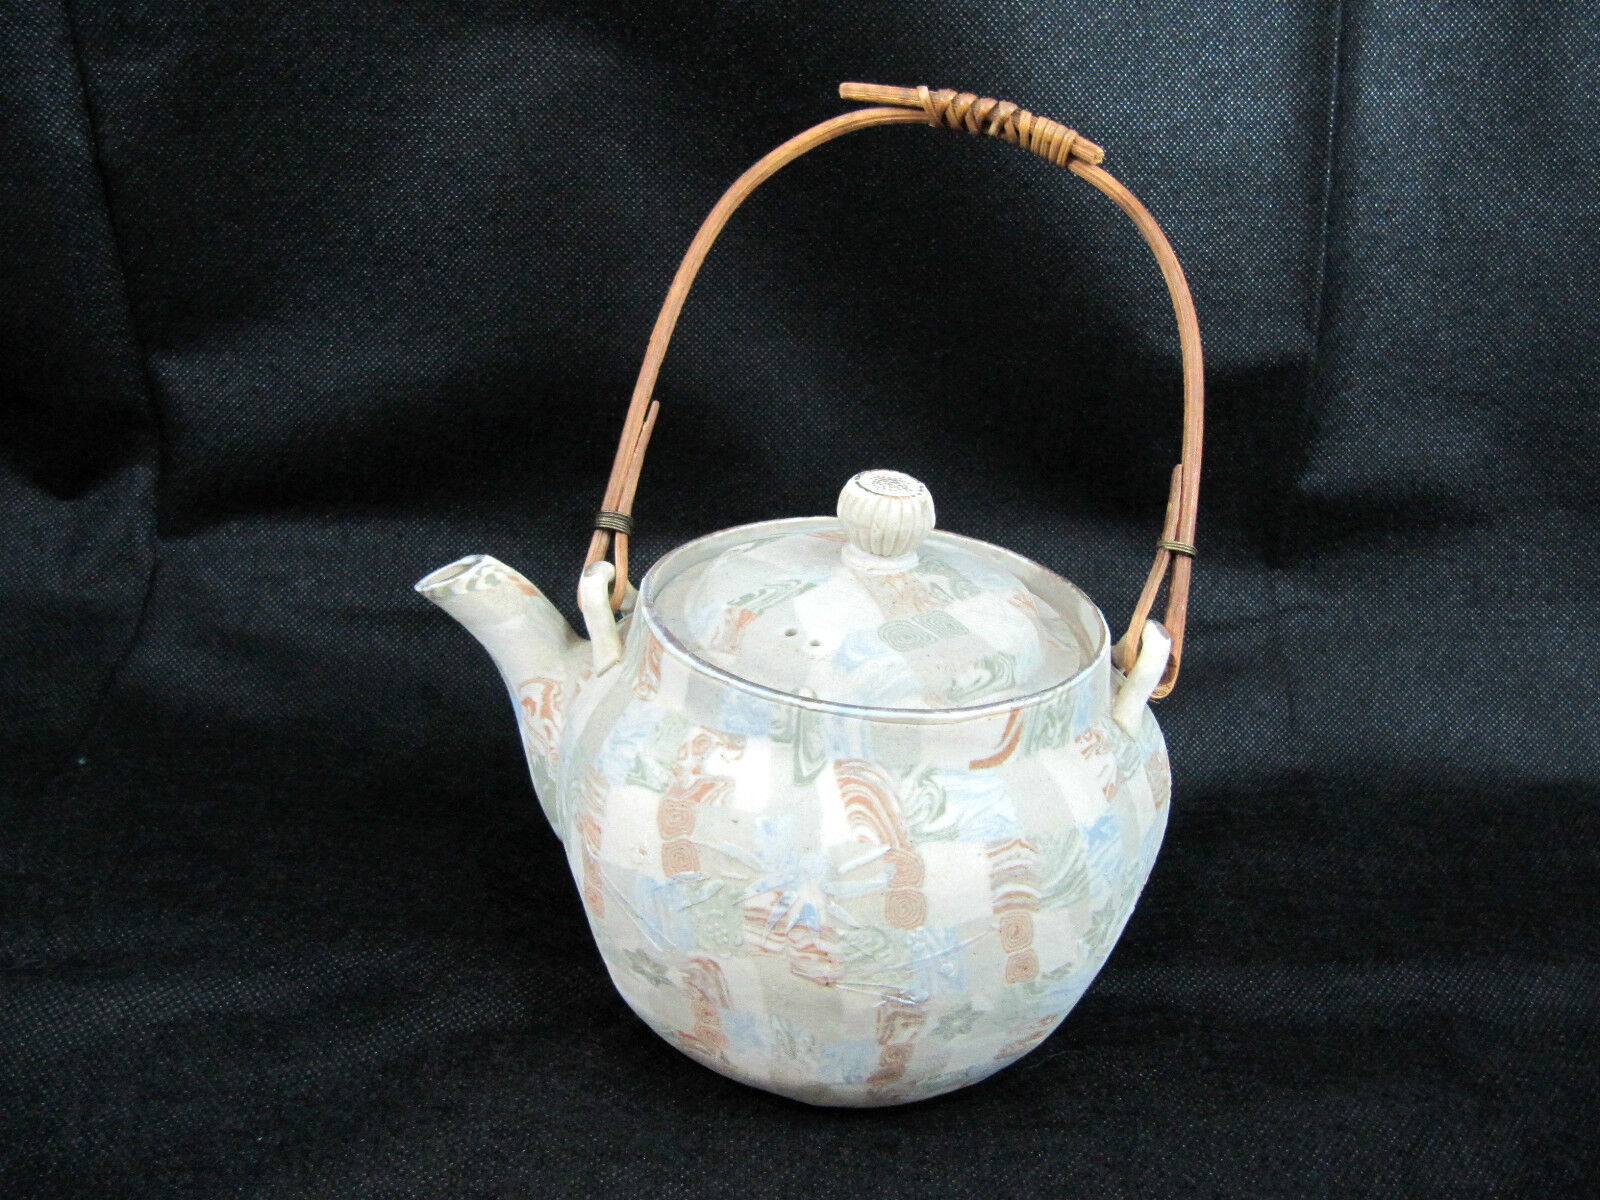 ANTIQUE JAPANESE BANKO TEAPOT c1910 in MARBLED TAPESTRY DESIGN